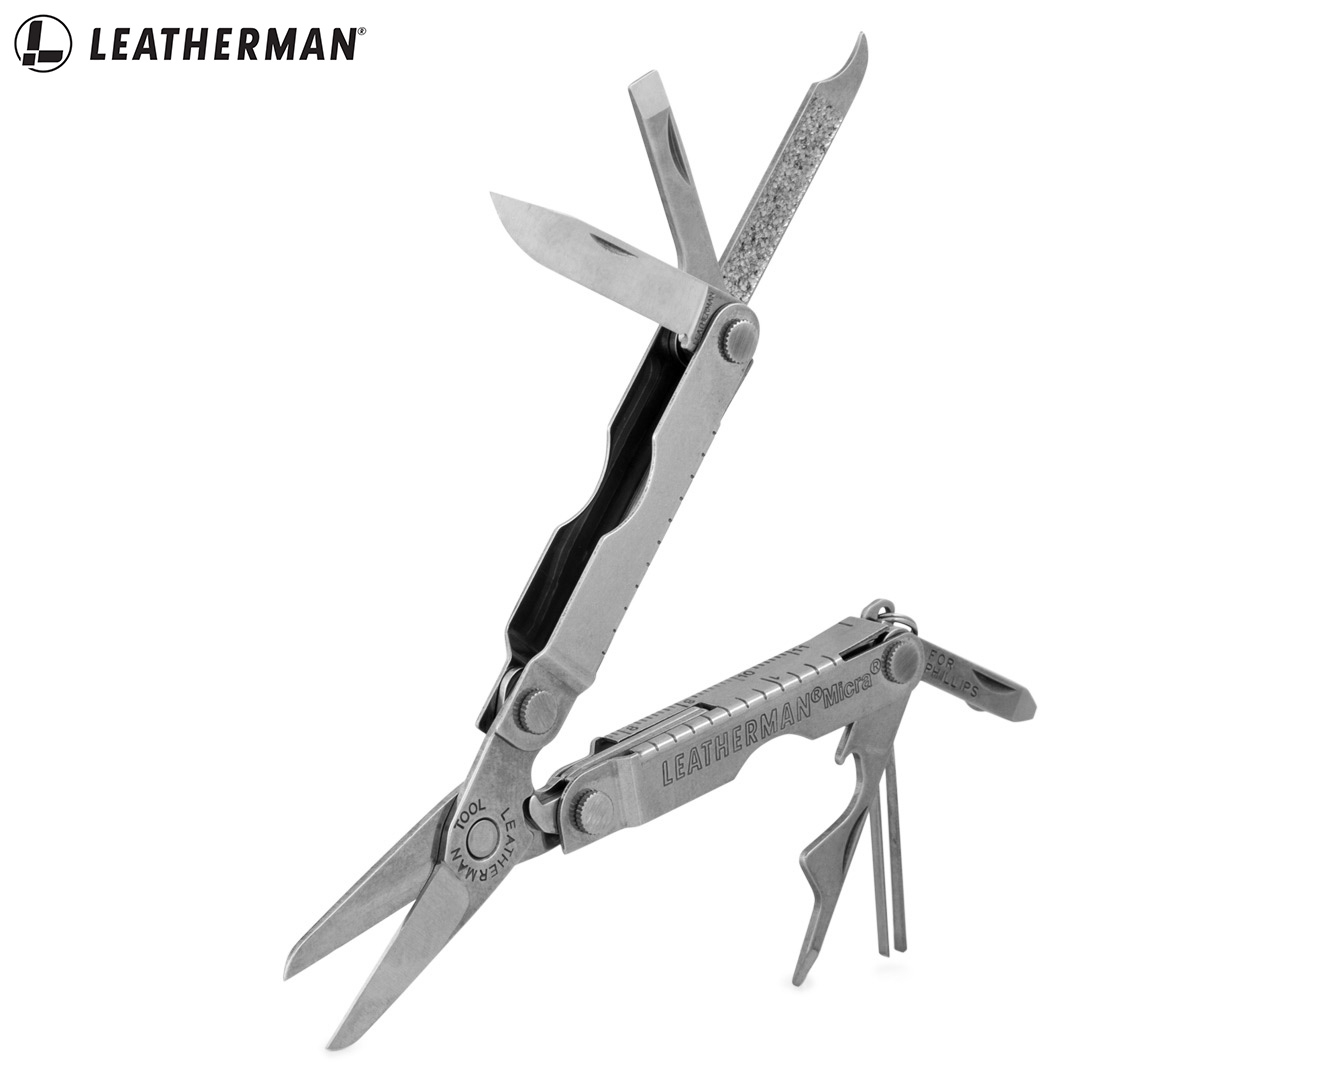 Leatherman Micra USA 10 in 1 Multitool Stainless Steel - Hiking